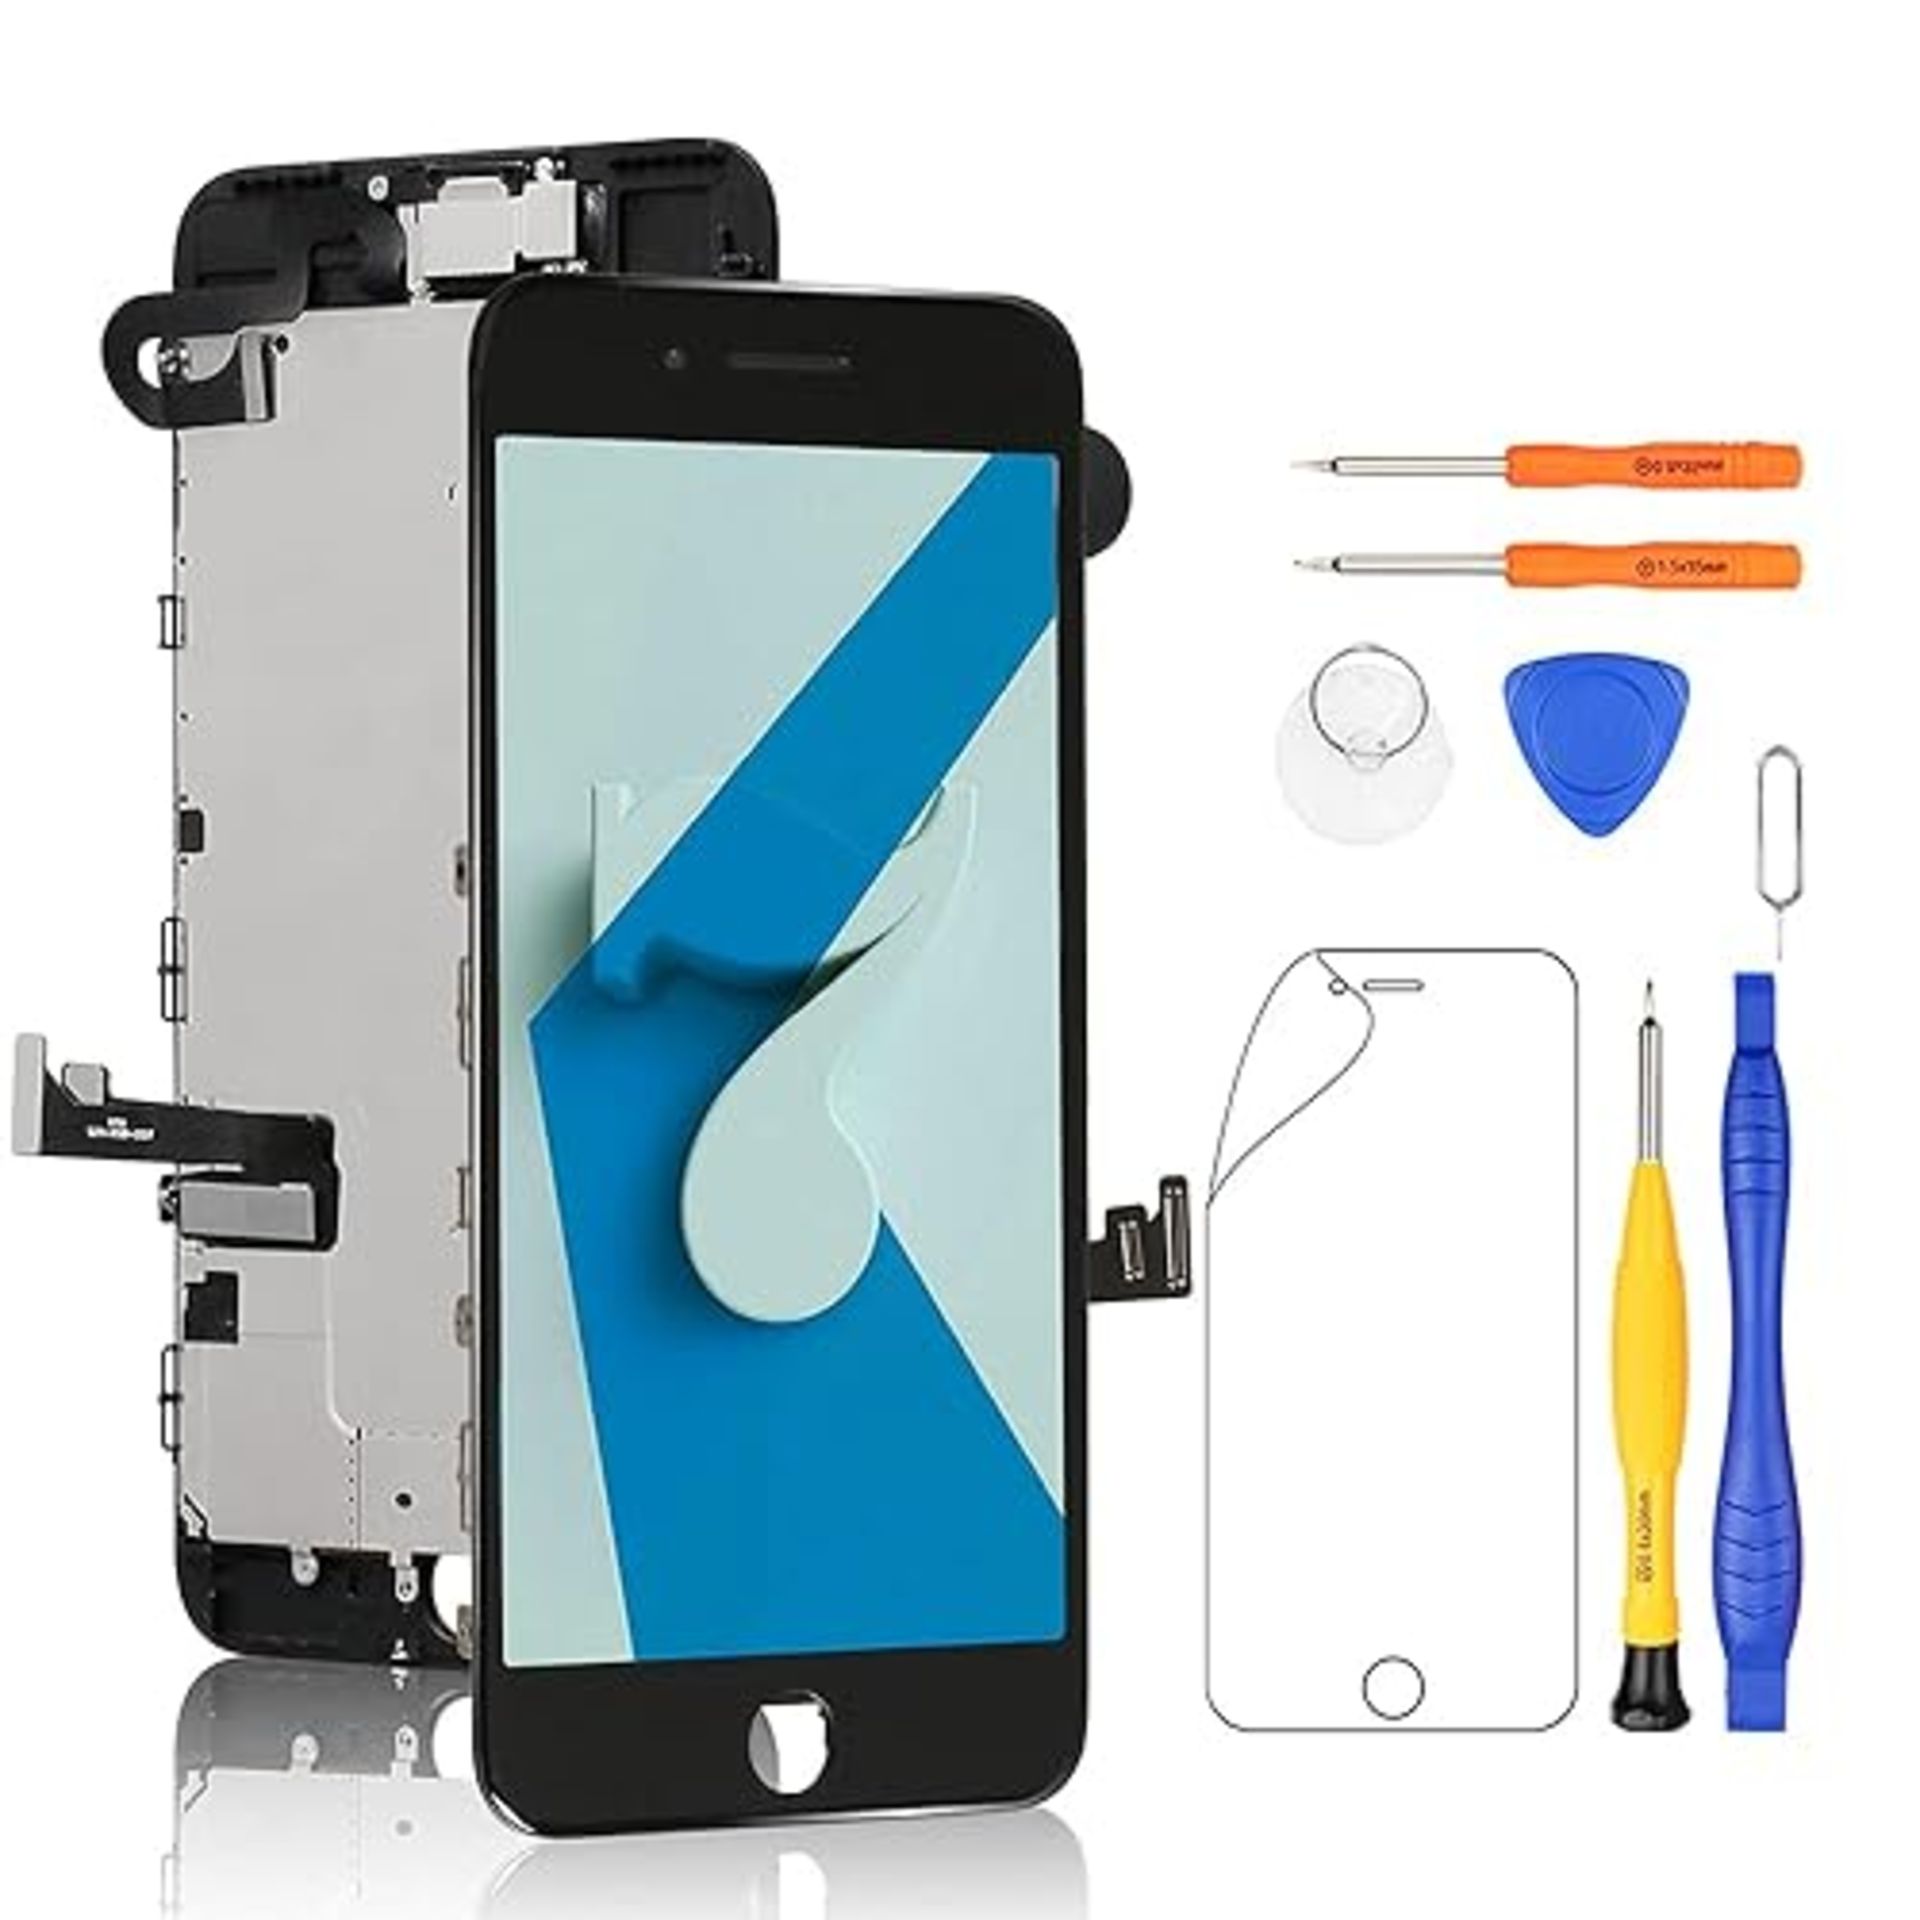 Yodoit for iPhone 7 Screen Replacement Black With Front Camera, Earpiece Speaker, Shield plate, LCD